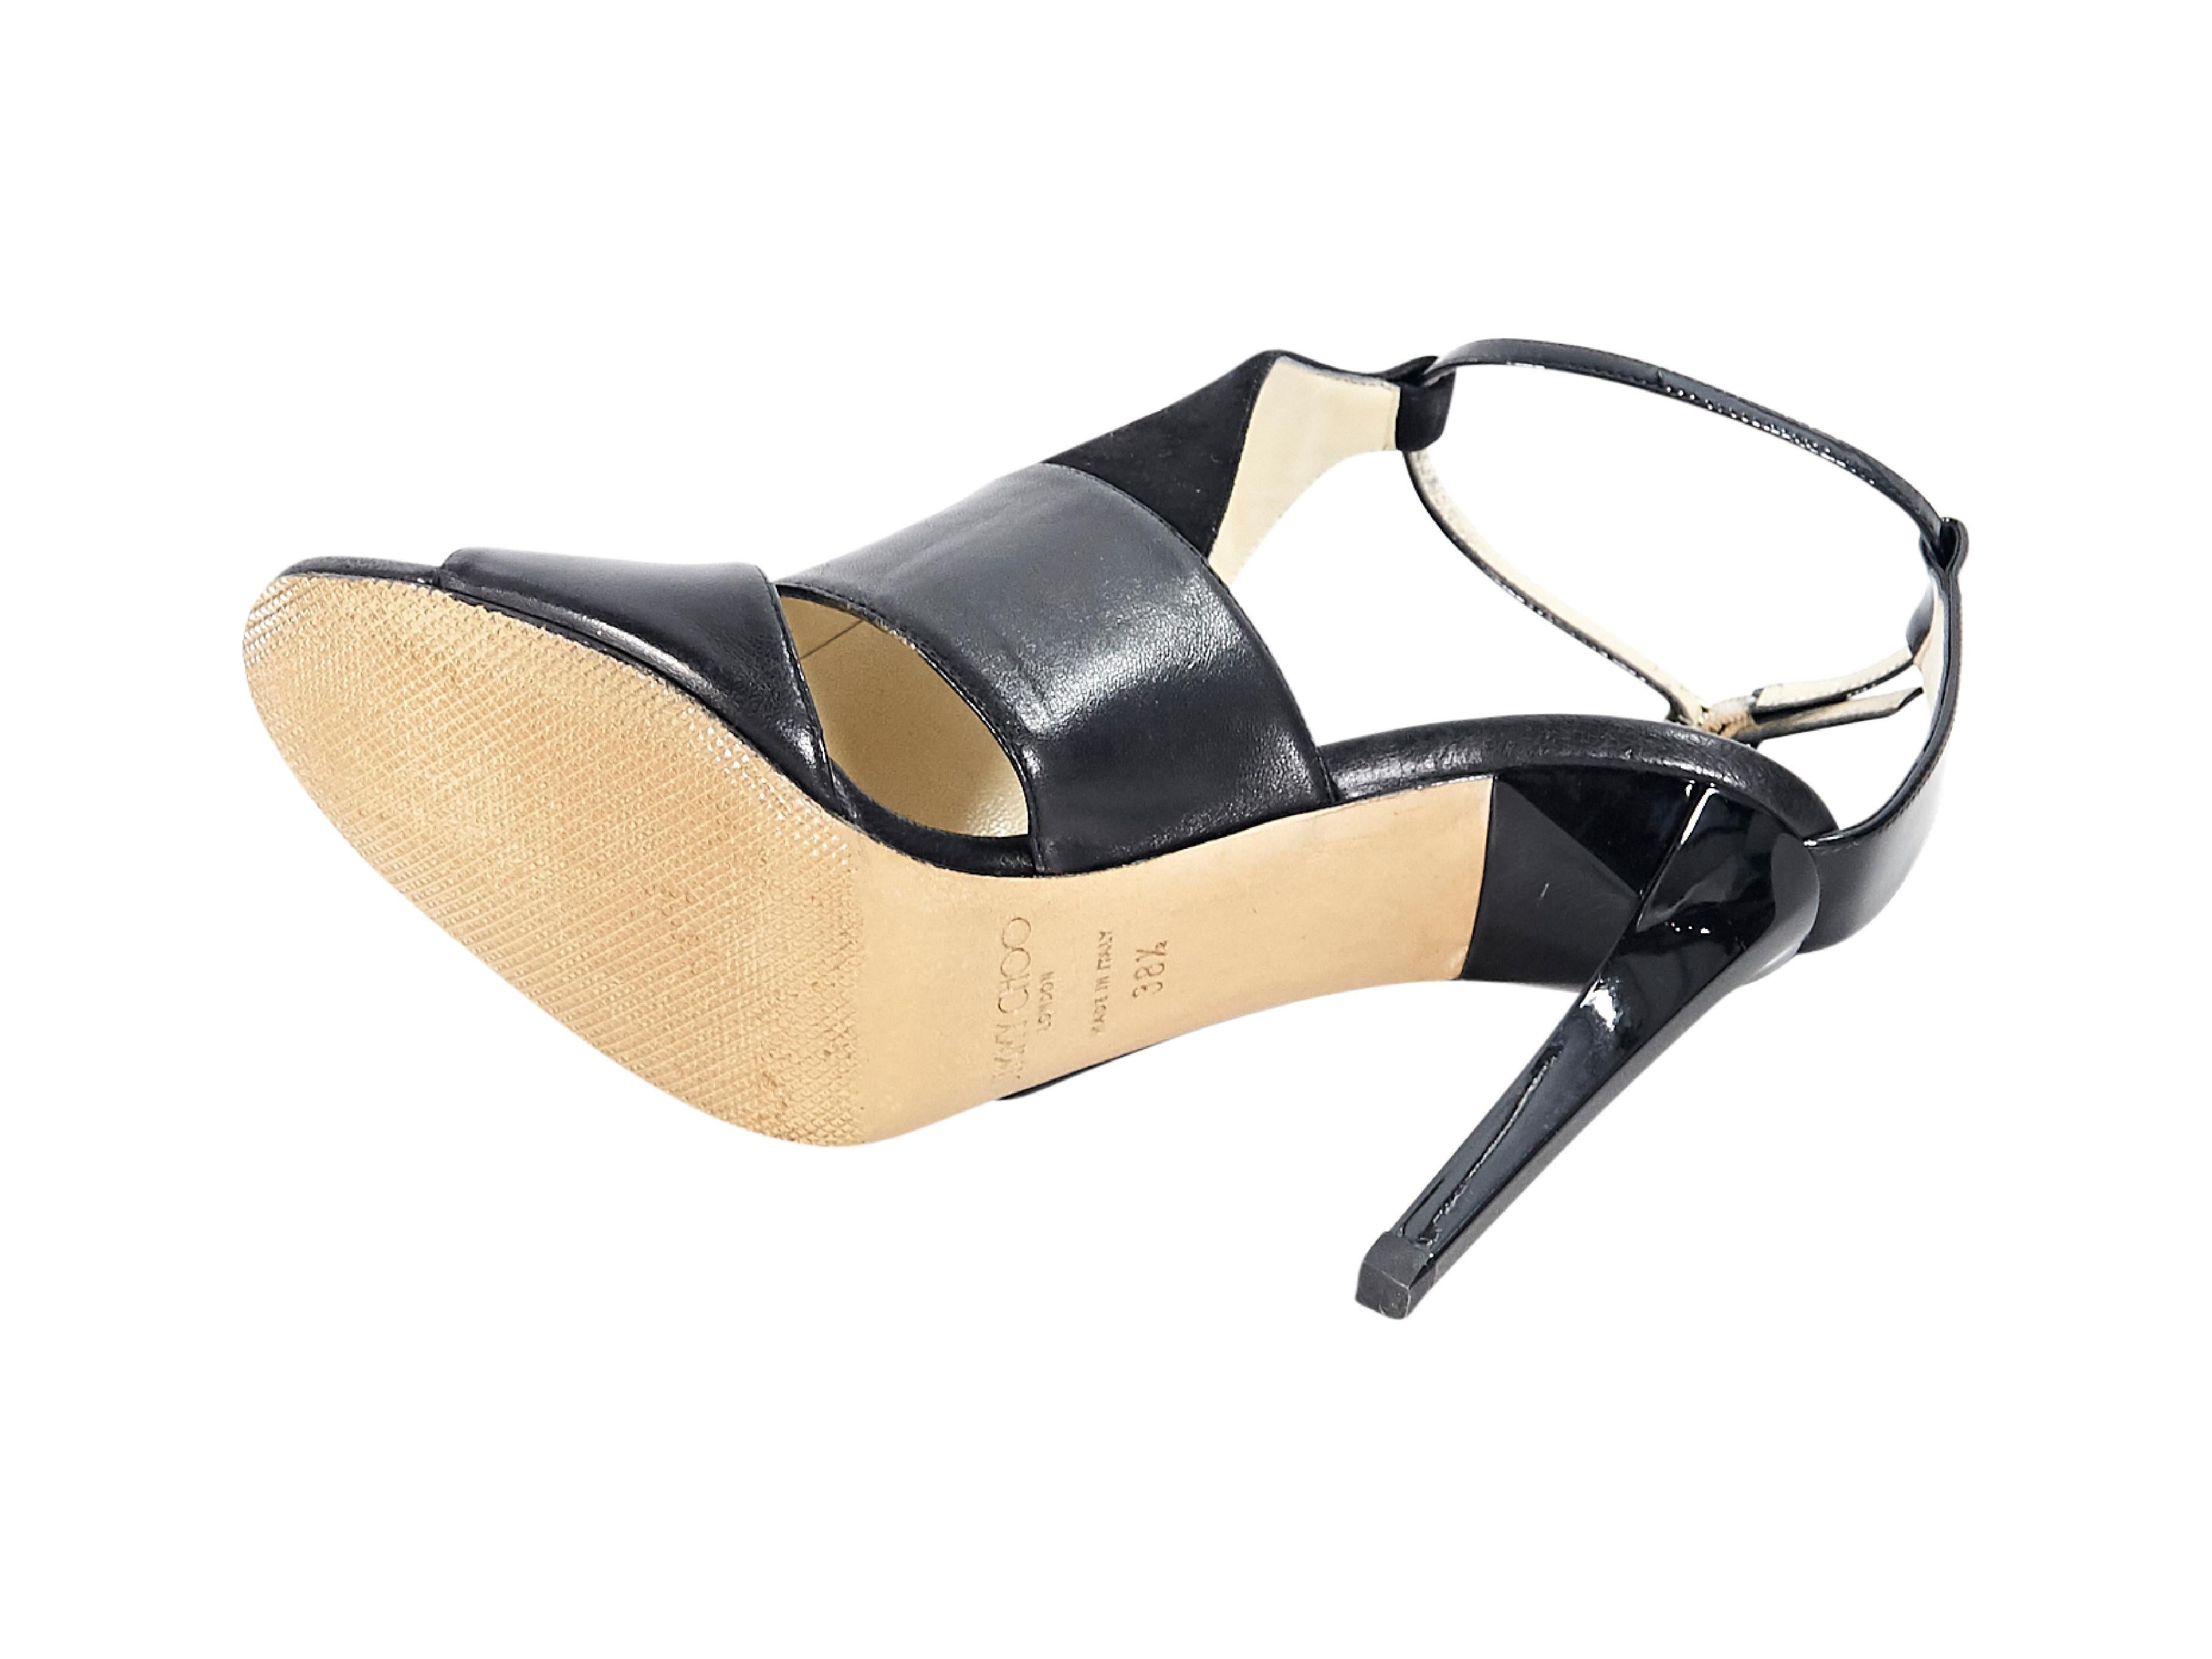 Women's Black Jimmy Choo Suede & Leather Timbus Sandals